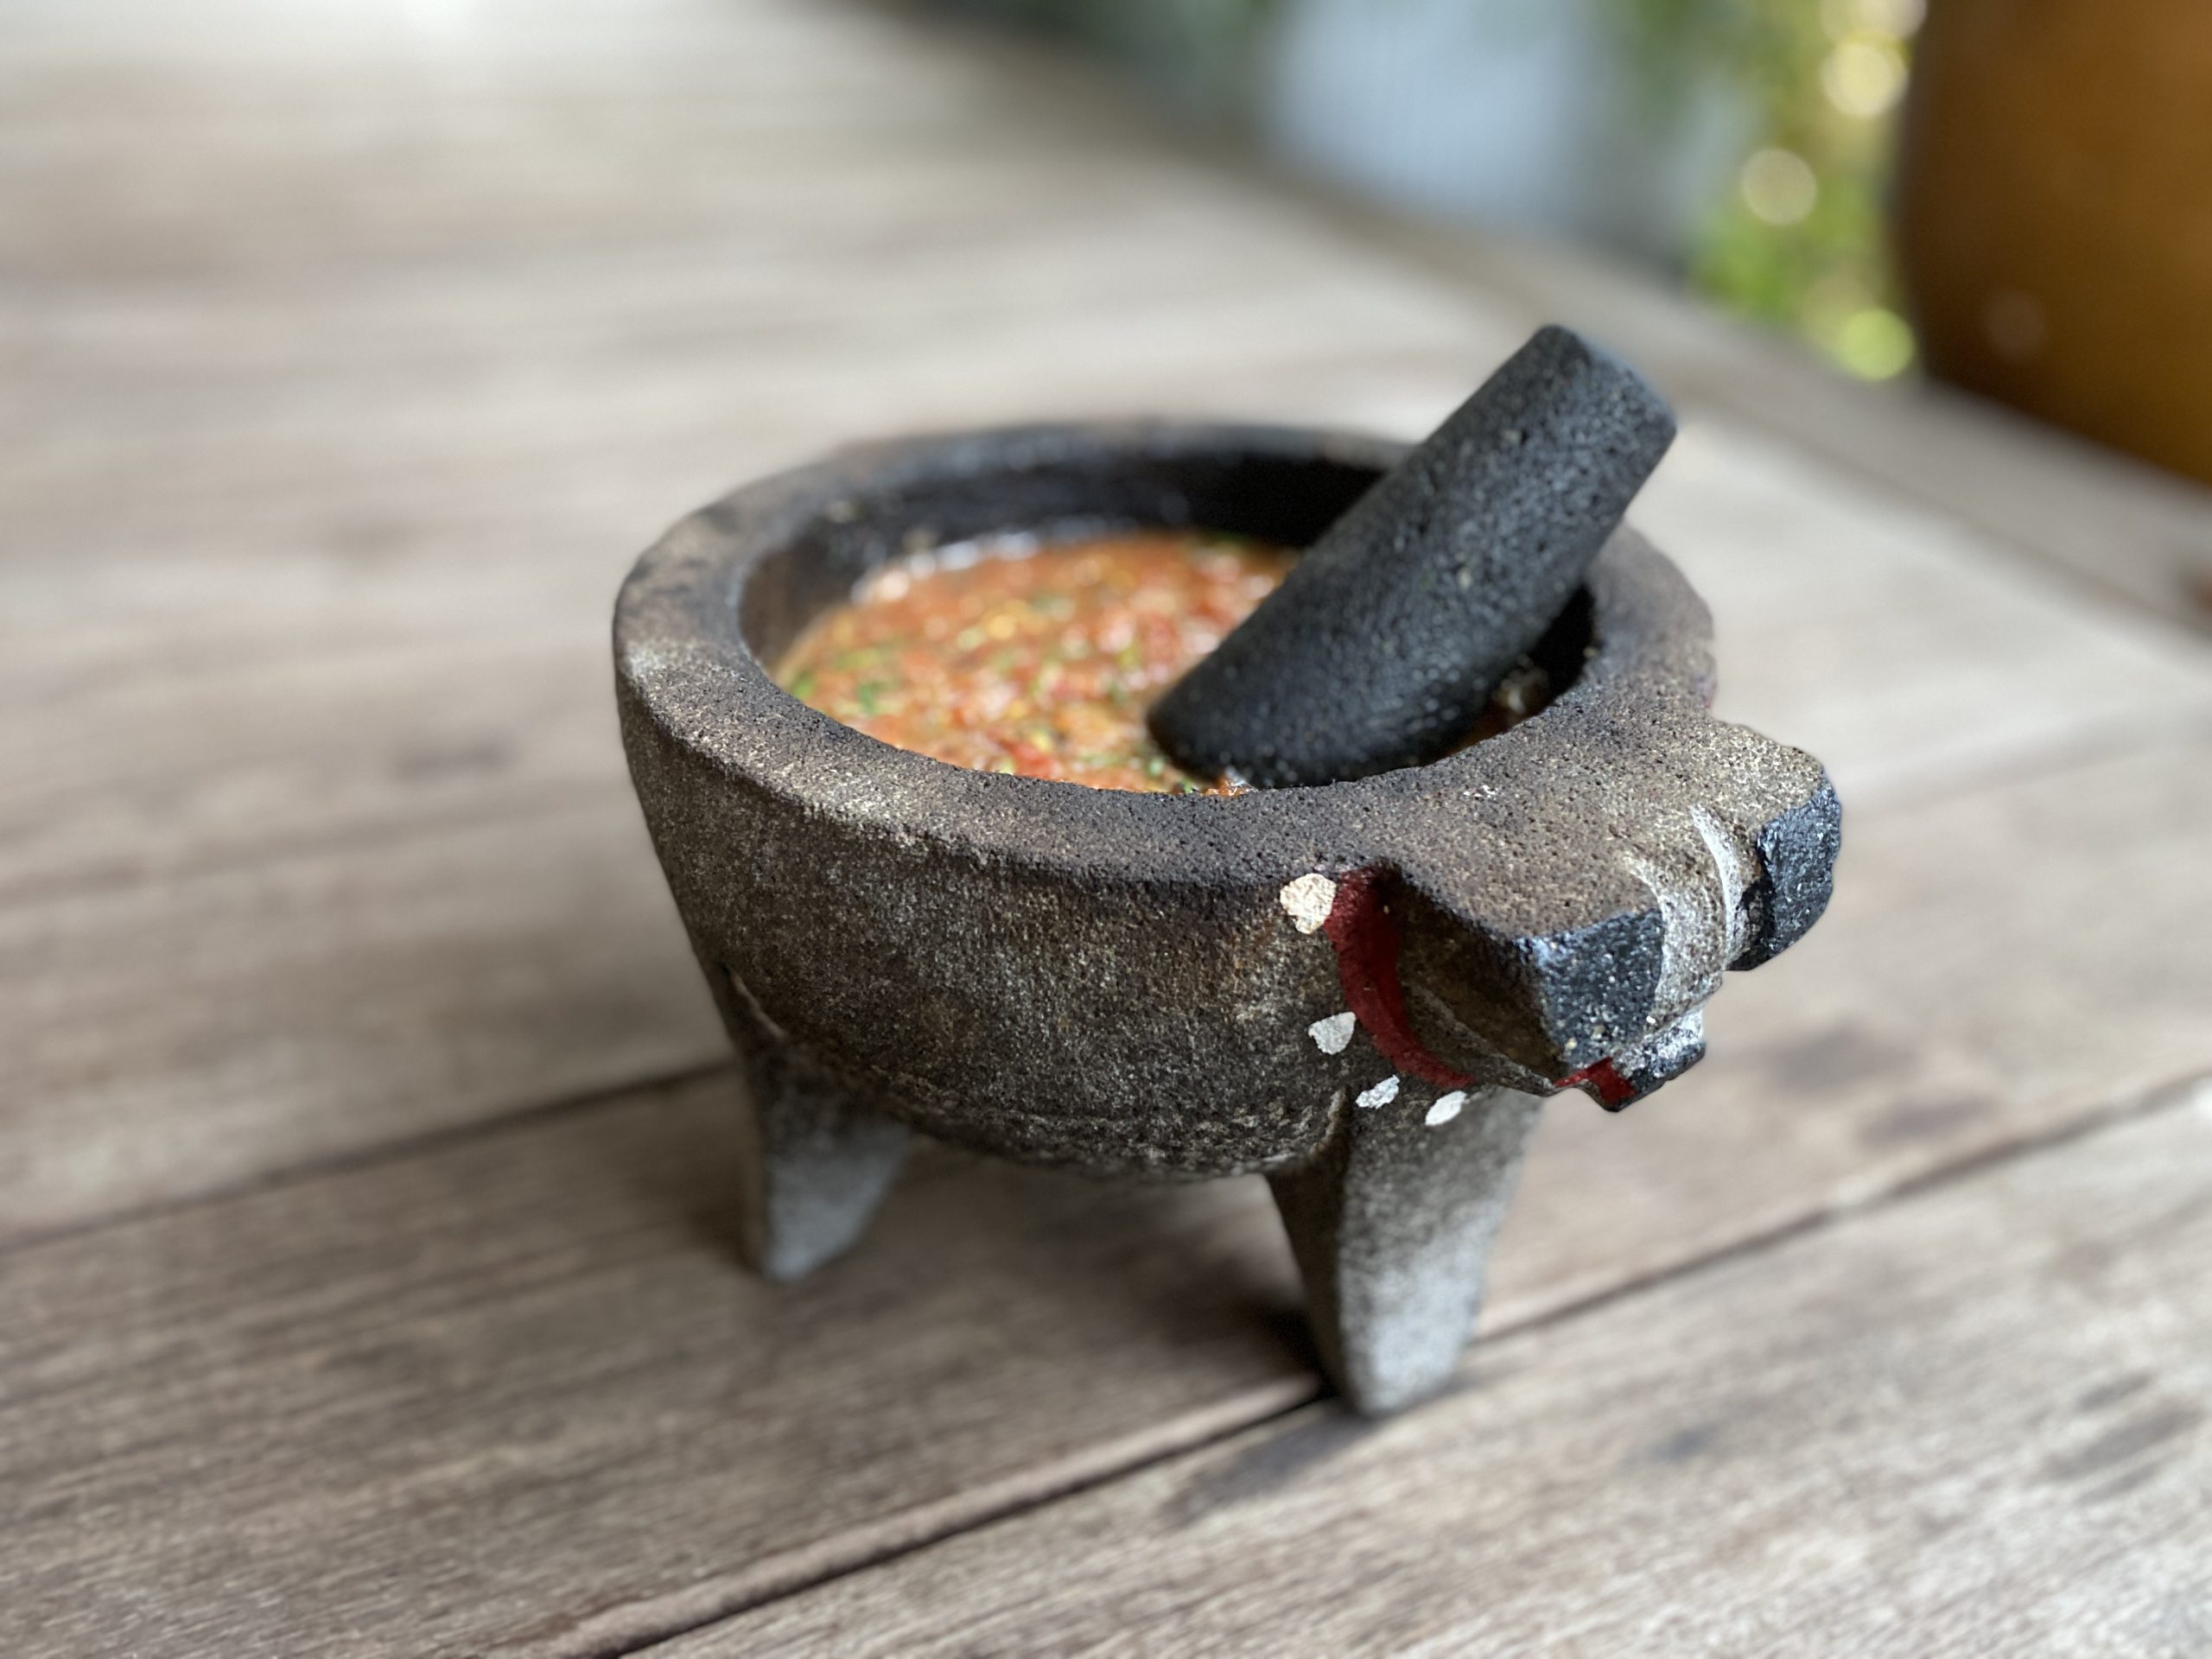 Mortar And Pestle Vs. Molcajete: What's The Difference?